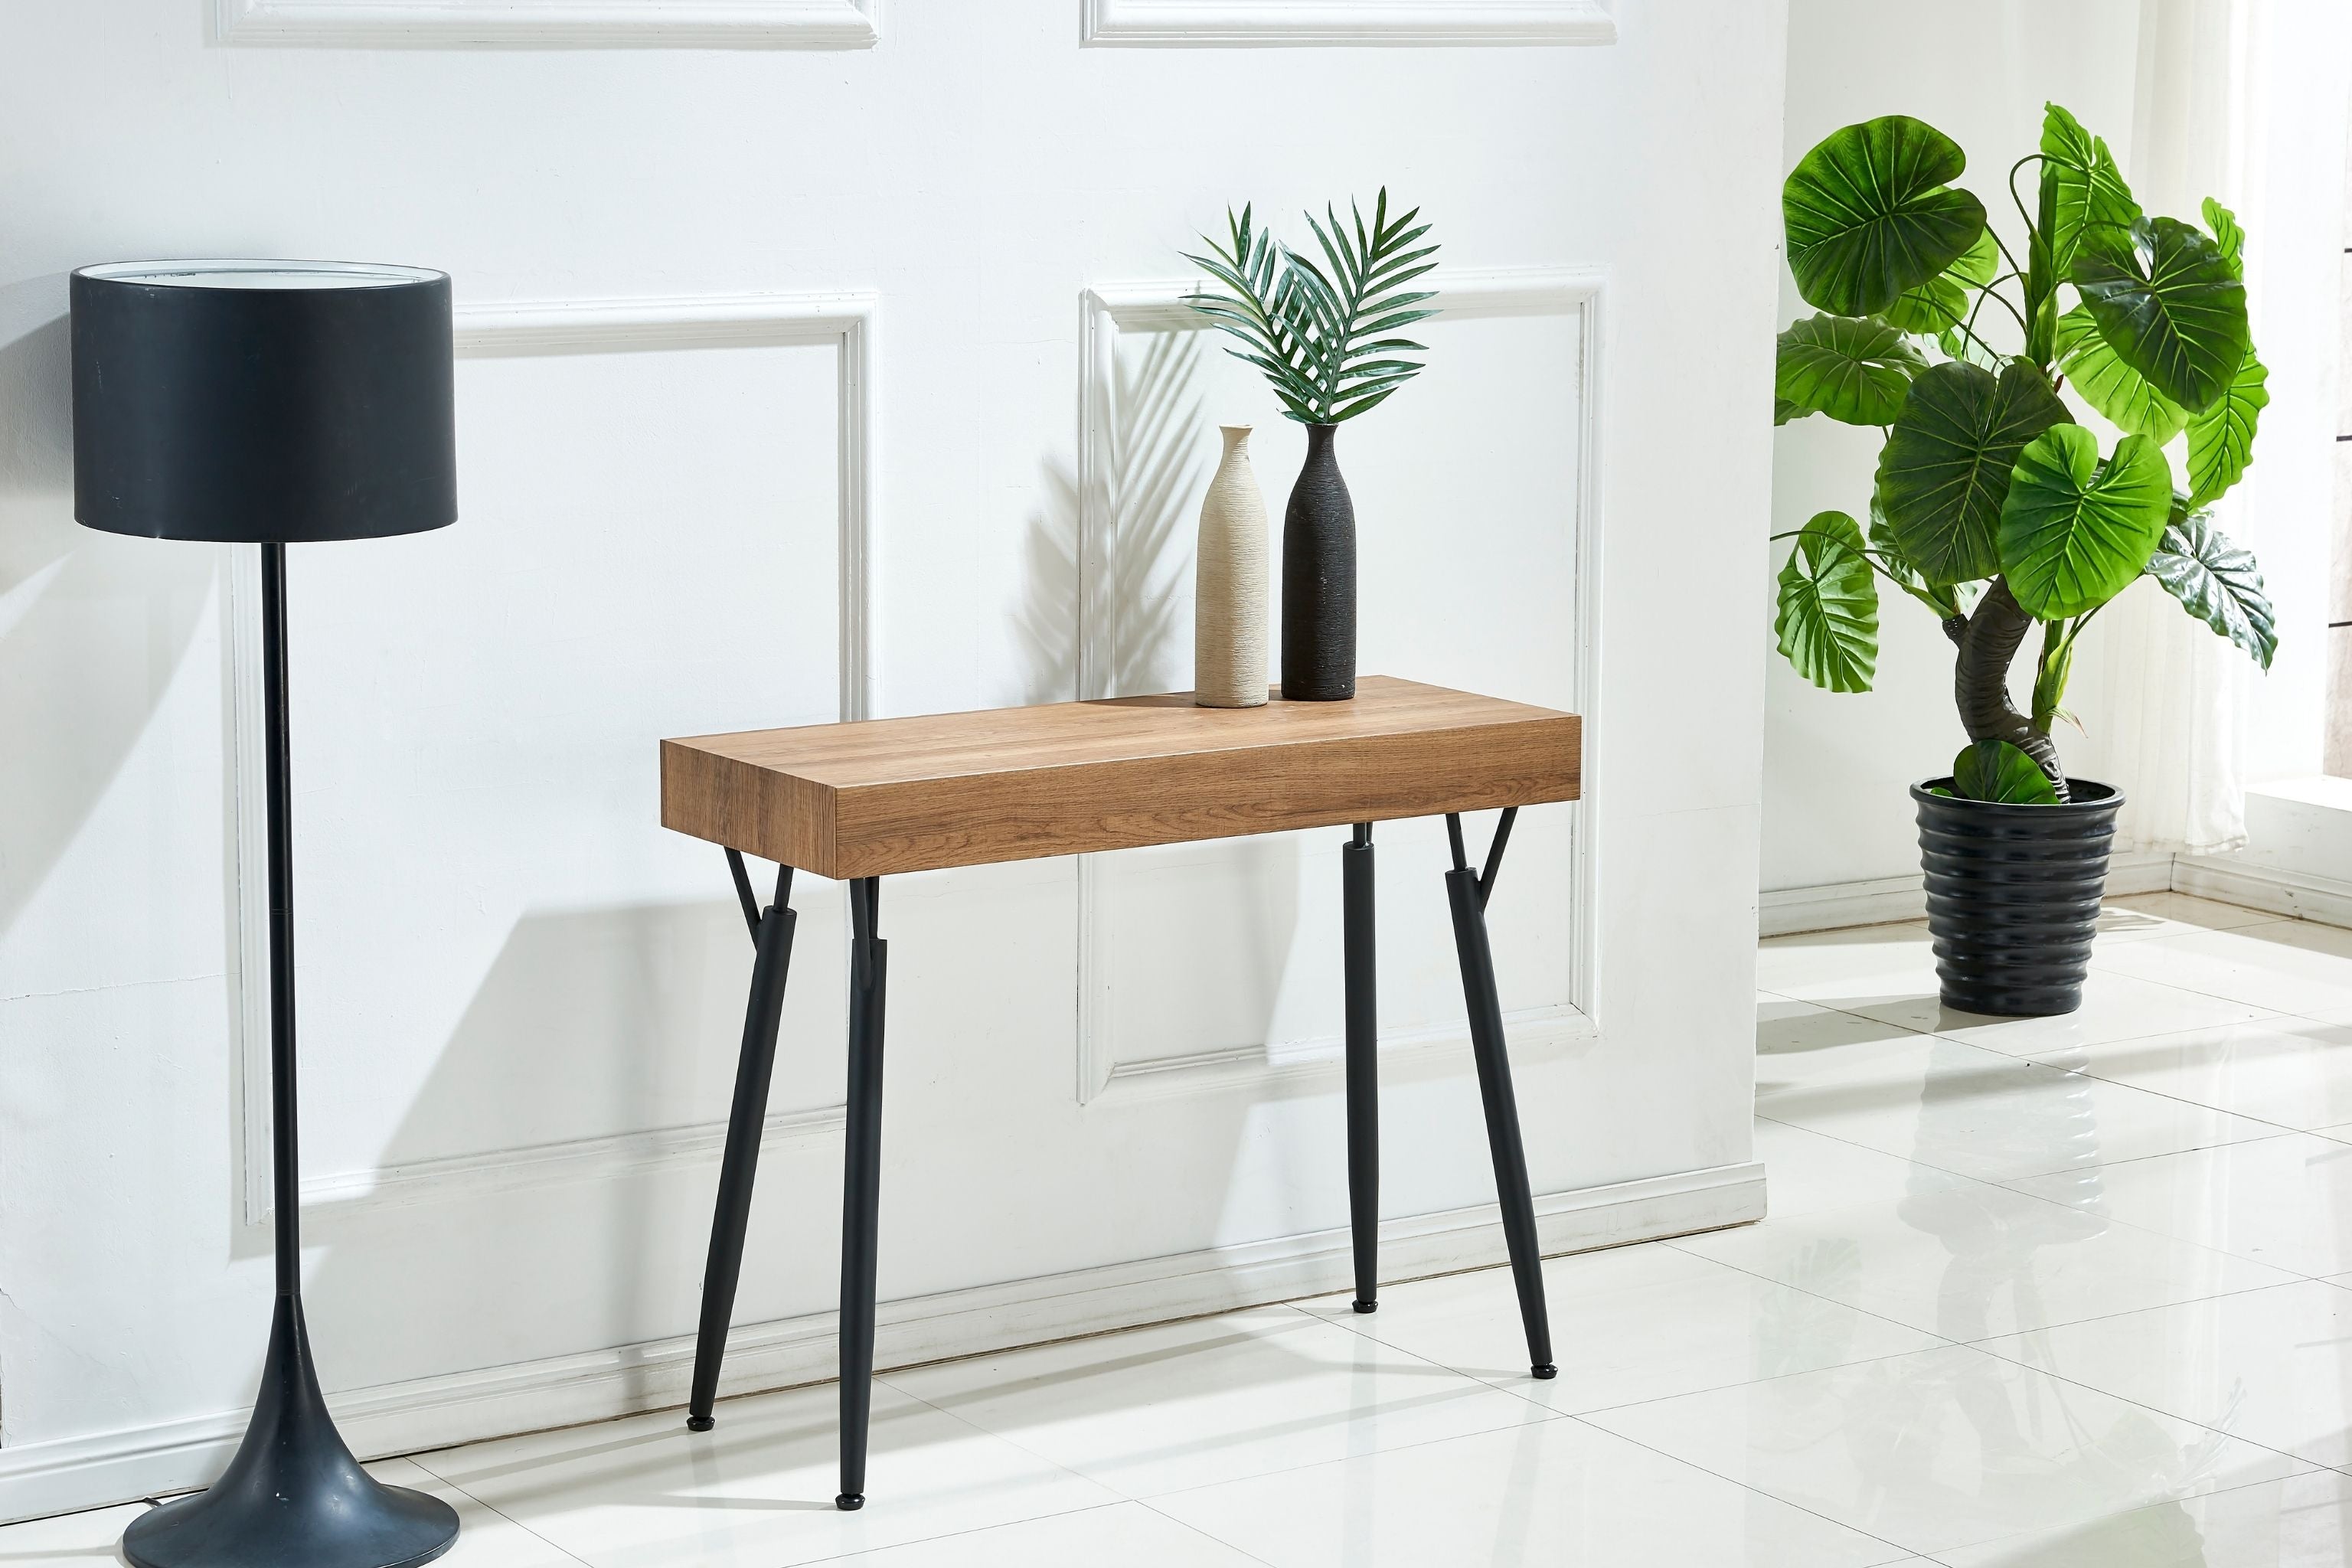 Staten Console Table